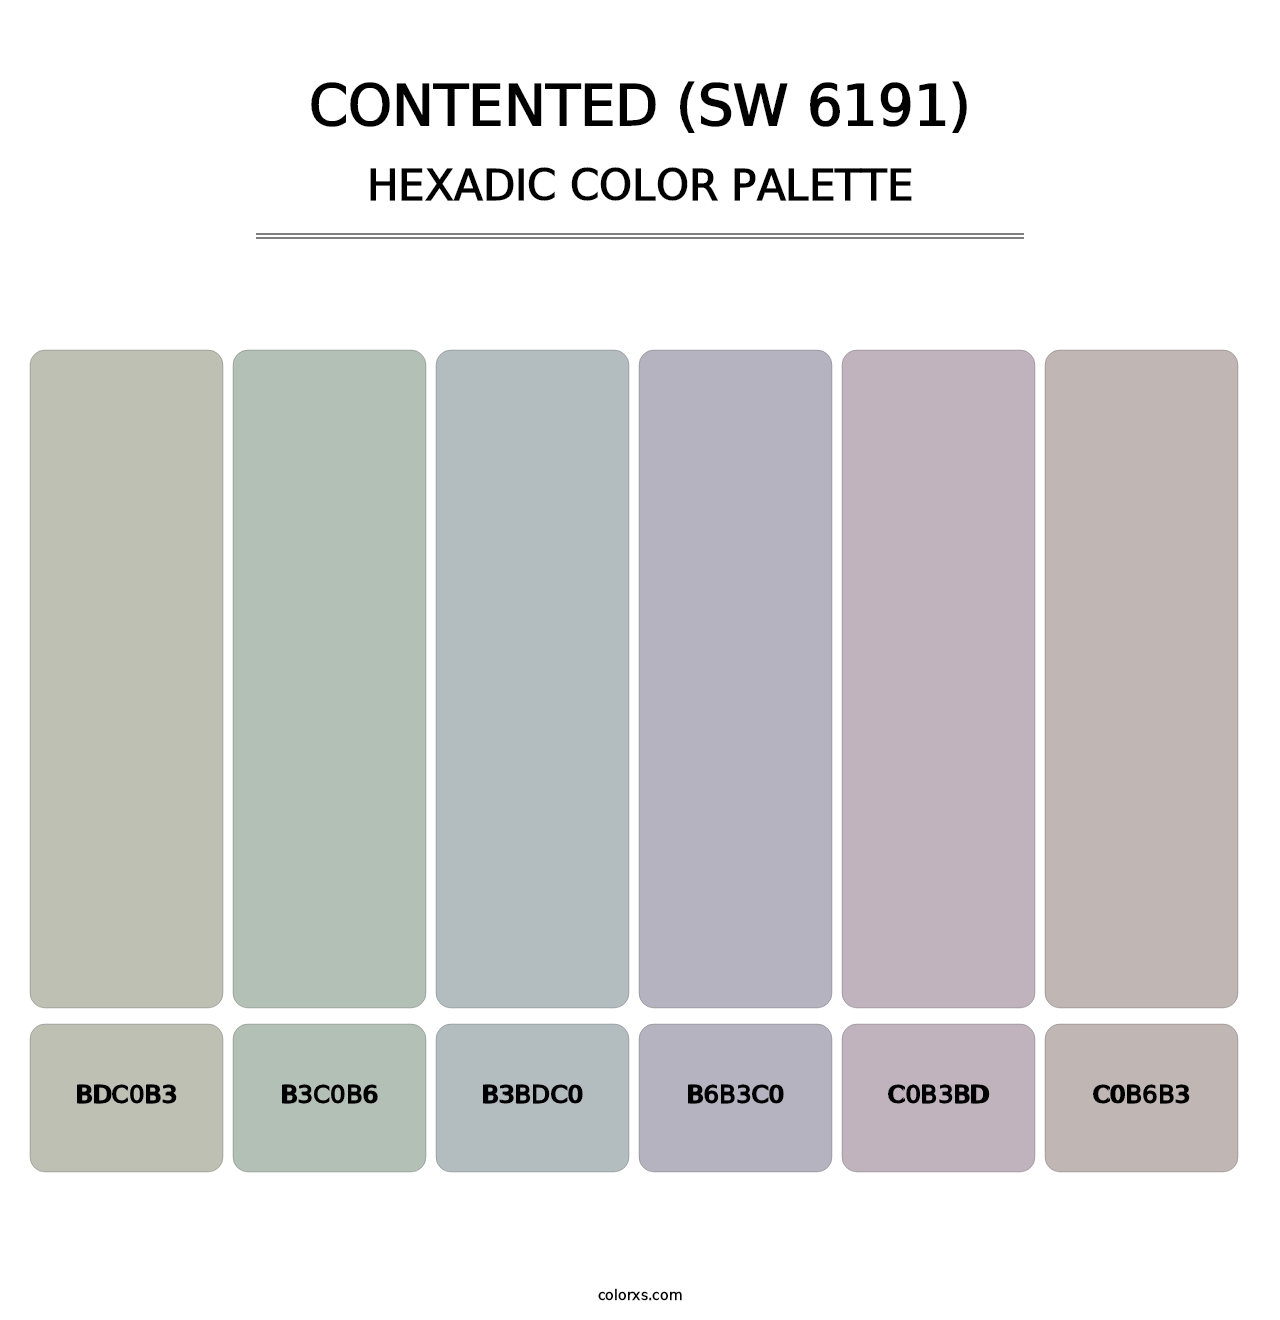 Contented (SW 6191) - Hexadic Color Palette